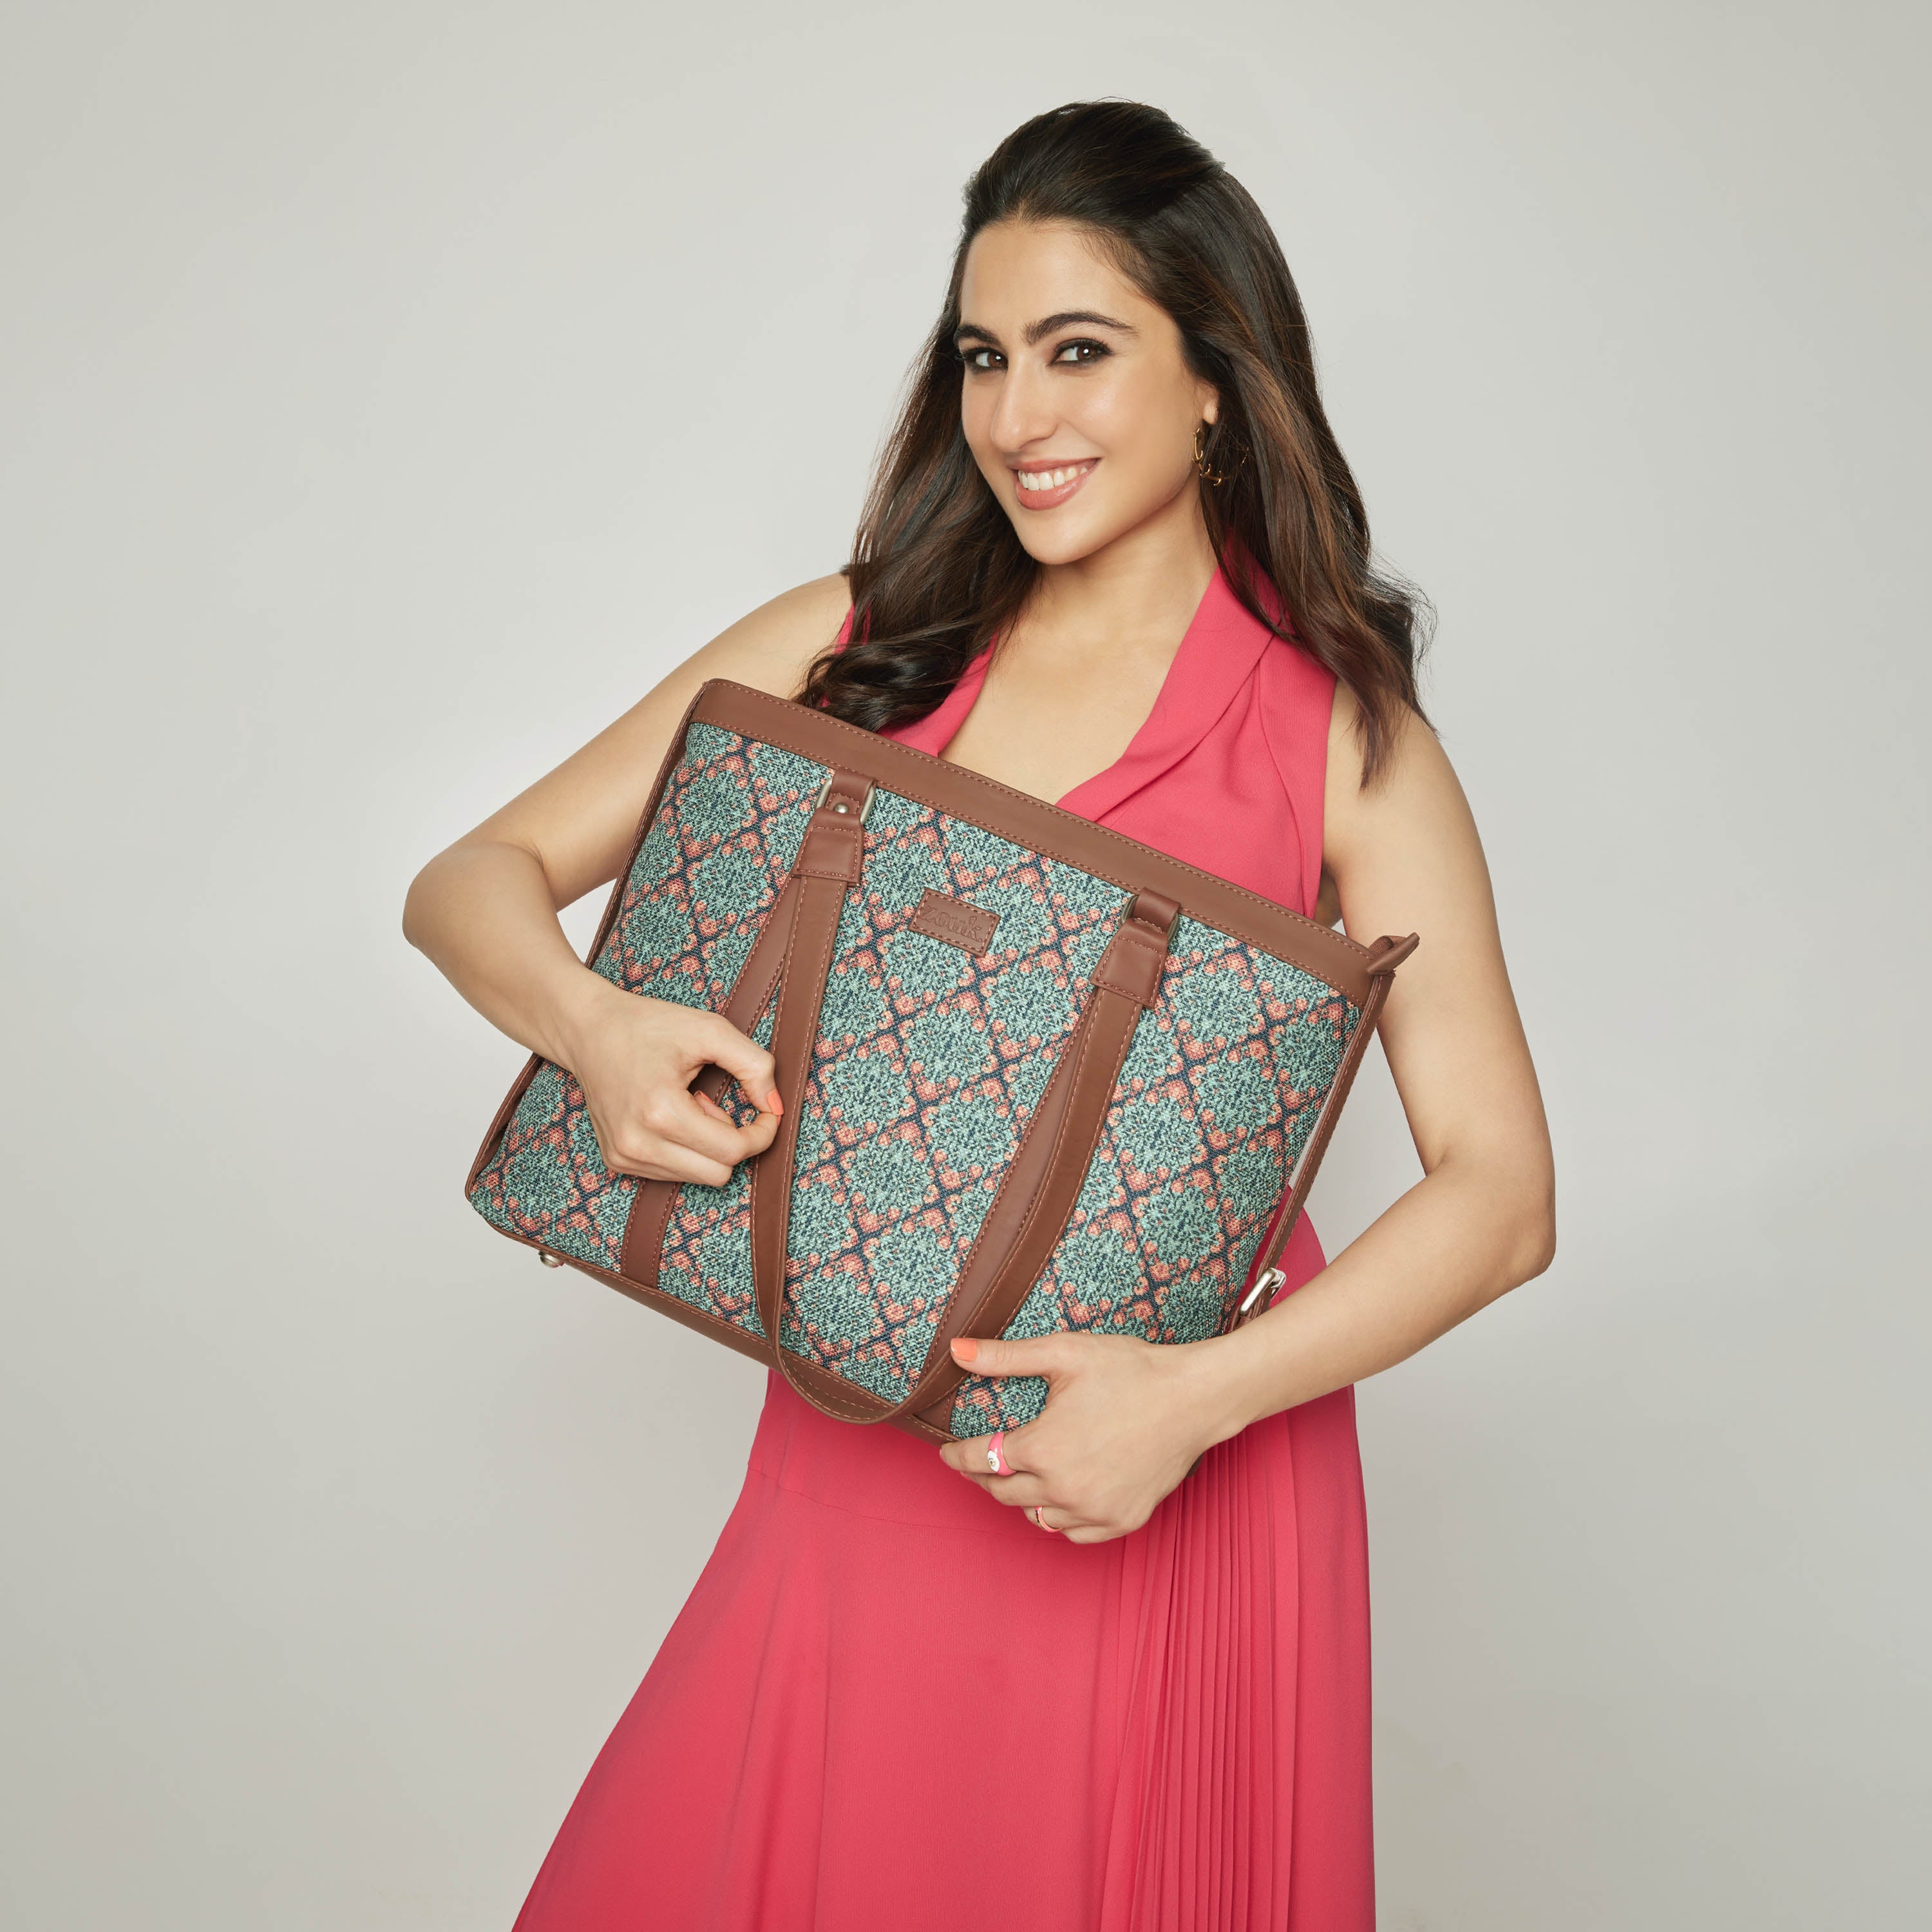 Tote Bags | Buy Tote Bags for Women Online - Accessorize India